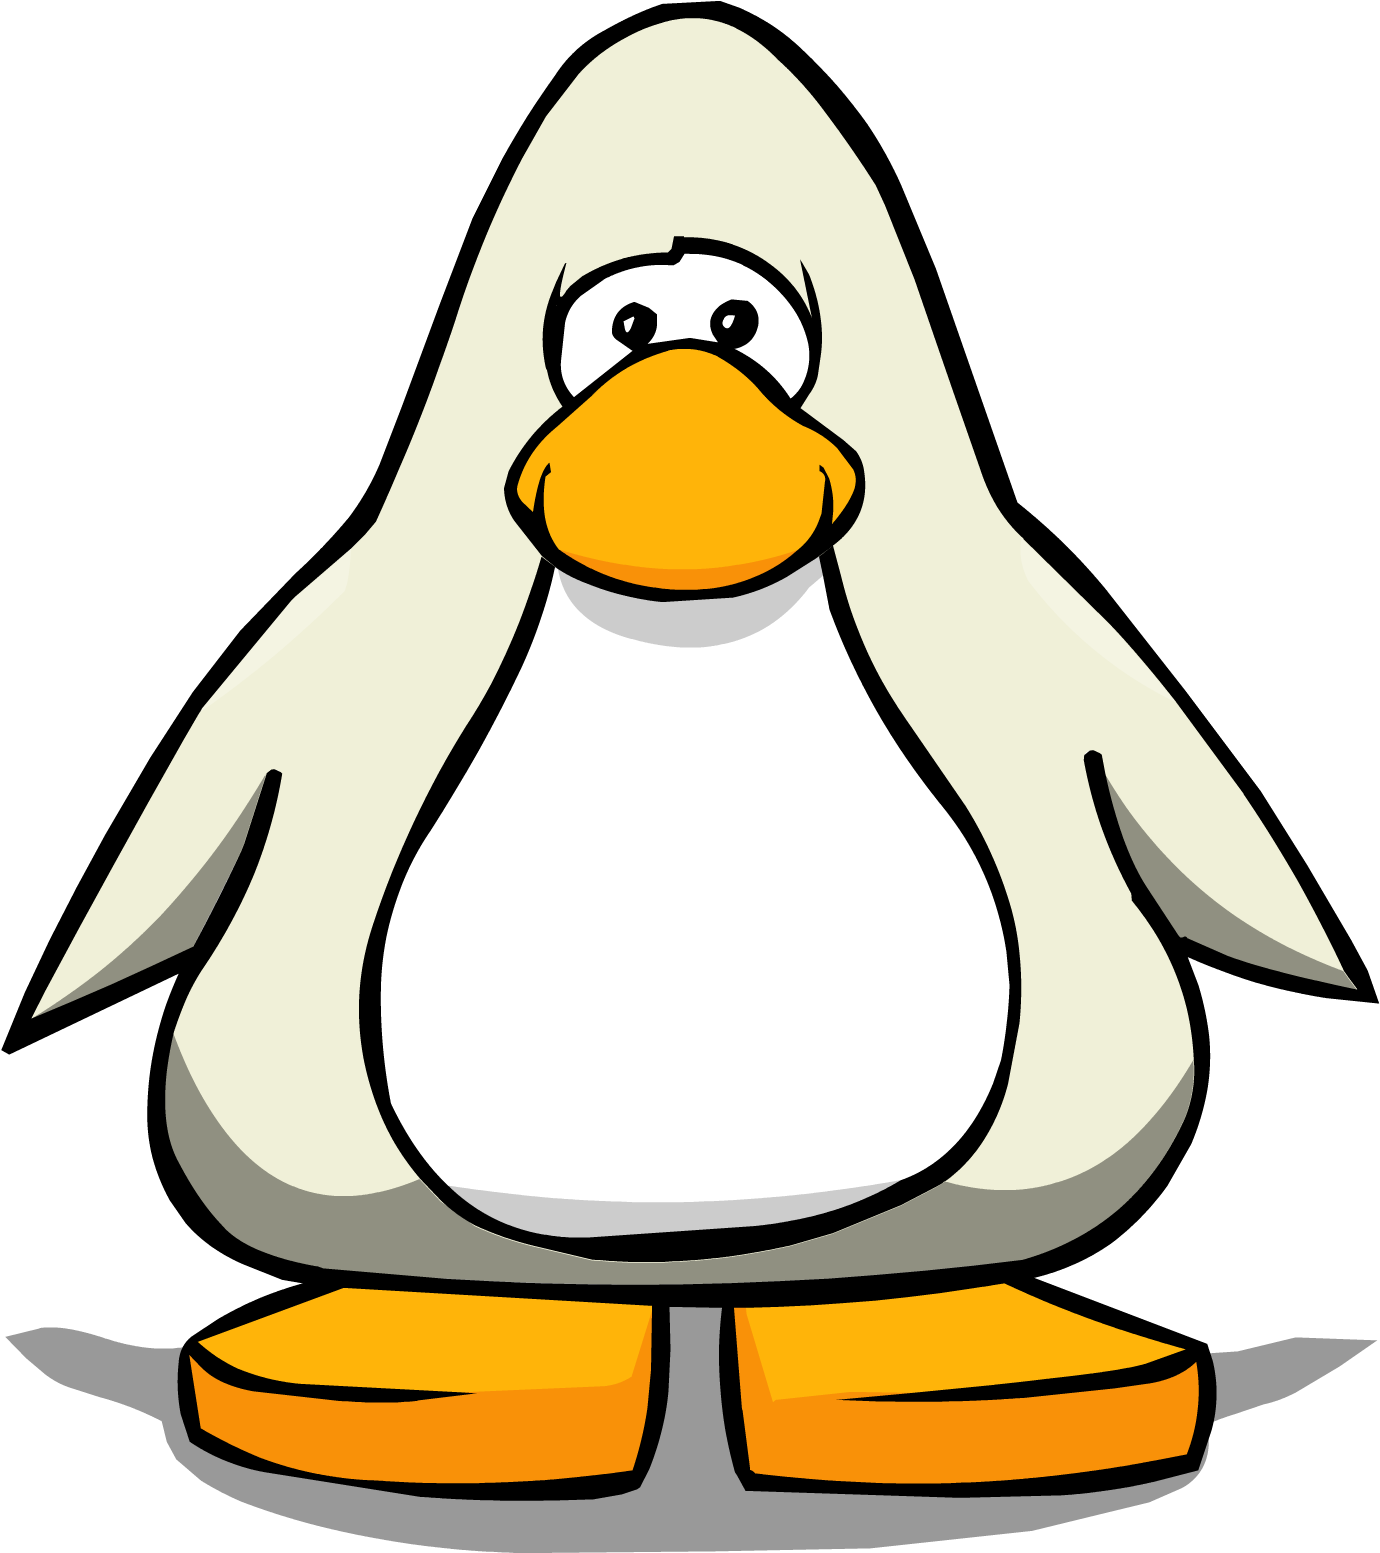 Arctic White From A Player Card - Club Penguin White Penguin (1386x1566)